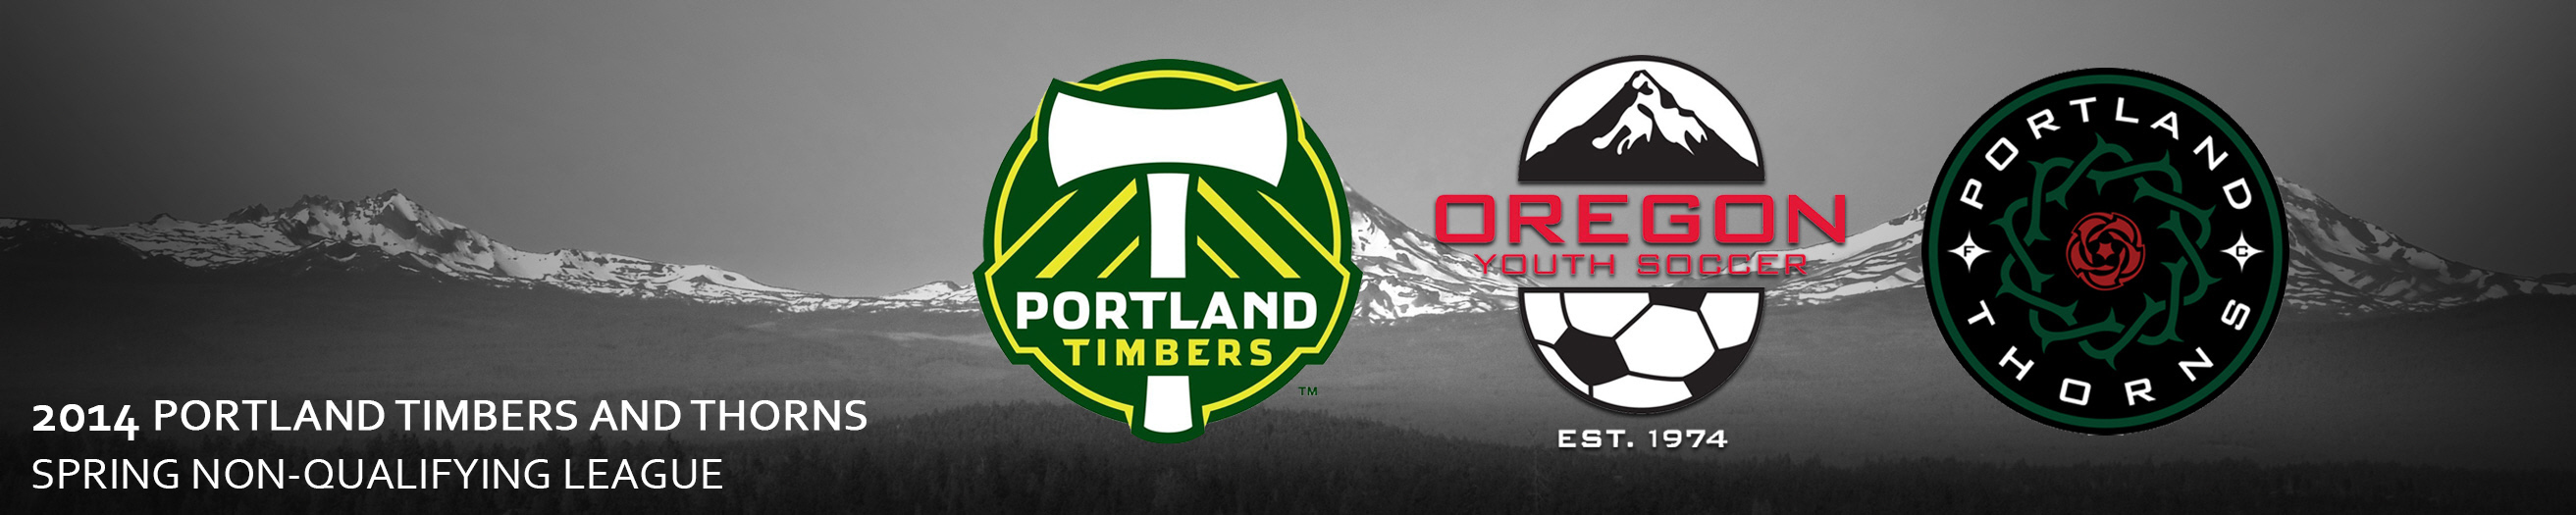 2014 Portland Timbers and Thorns Spring League banner